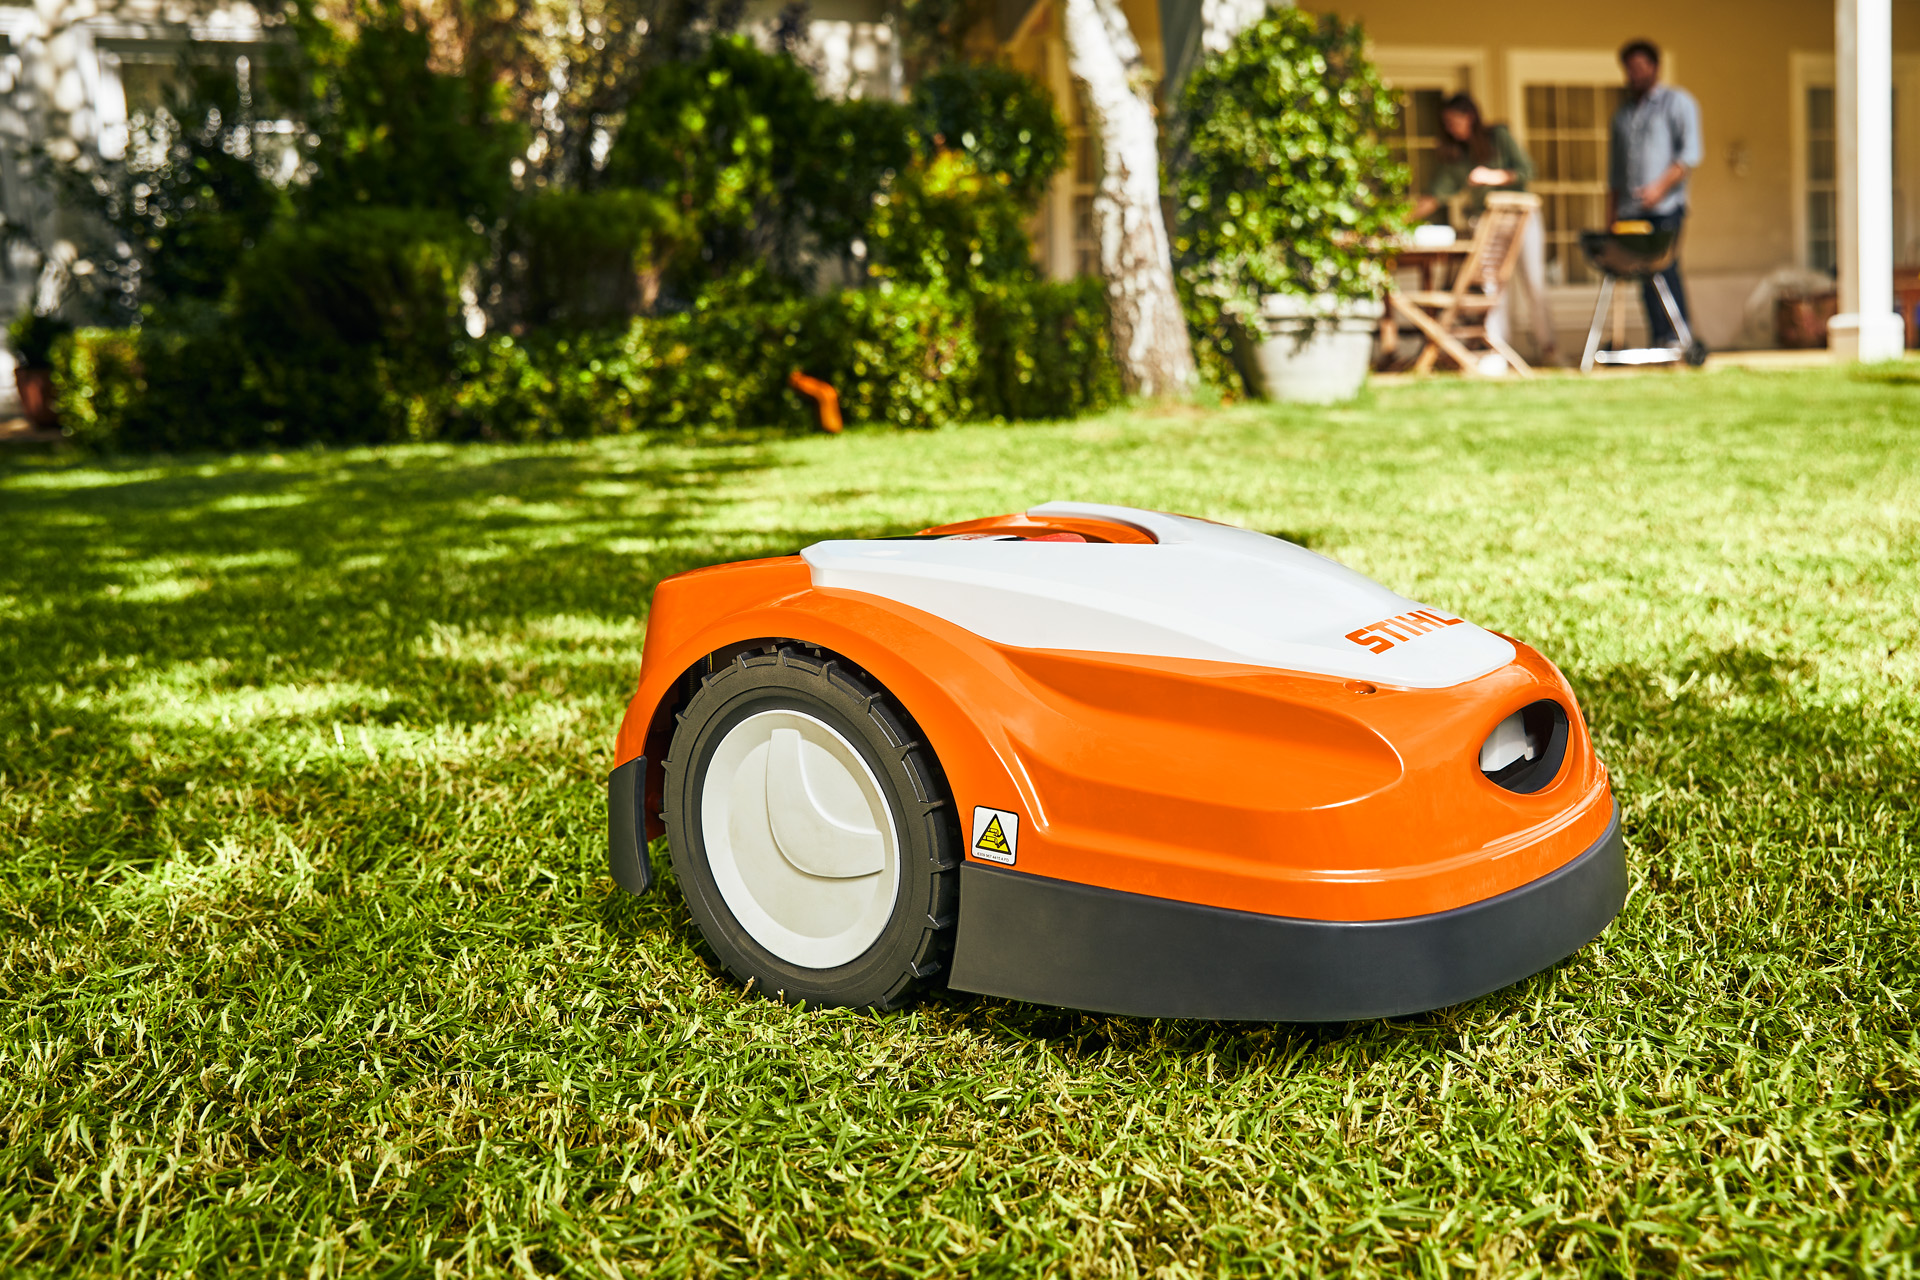 A STIHL iMOW® RI 422 robot lawn mower on a lawn in front of a house